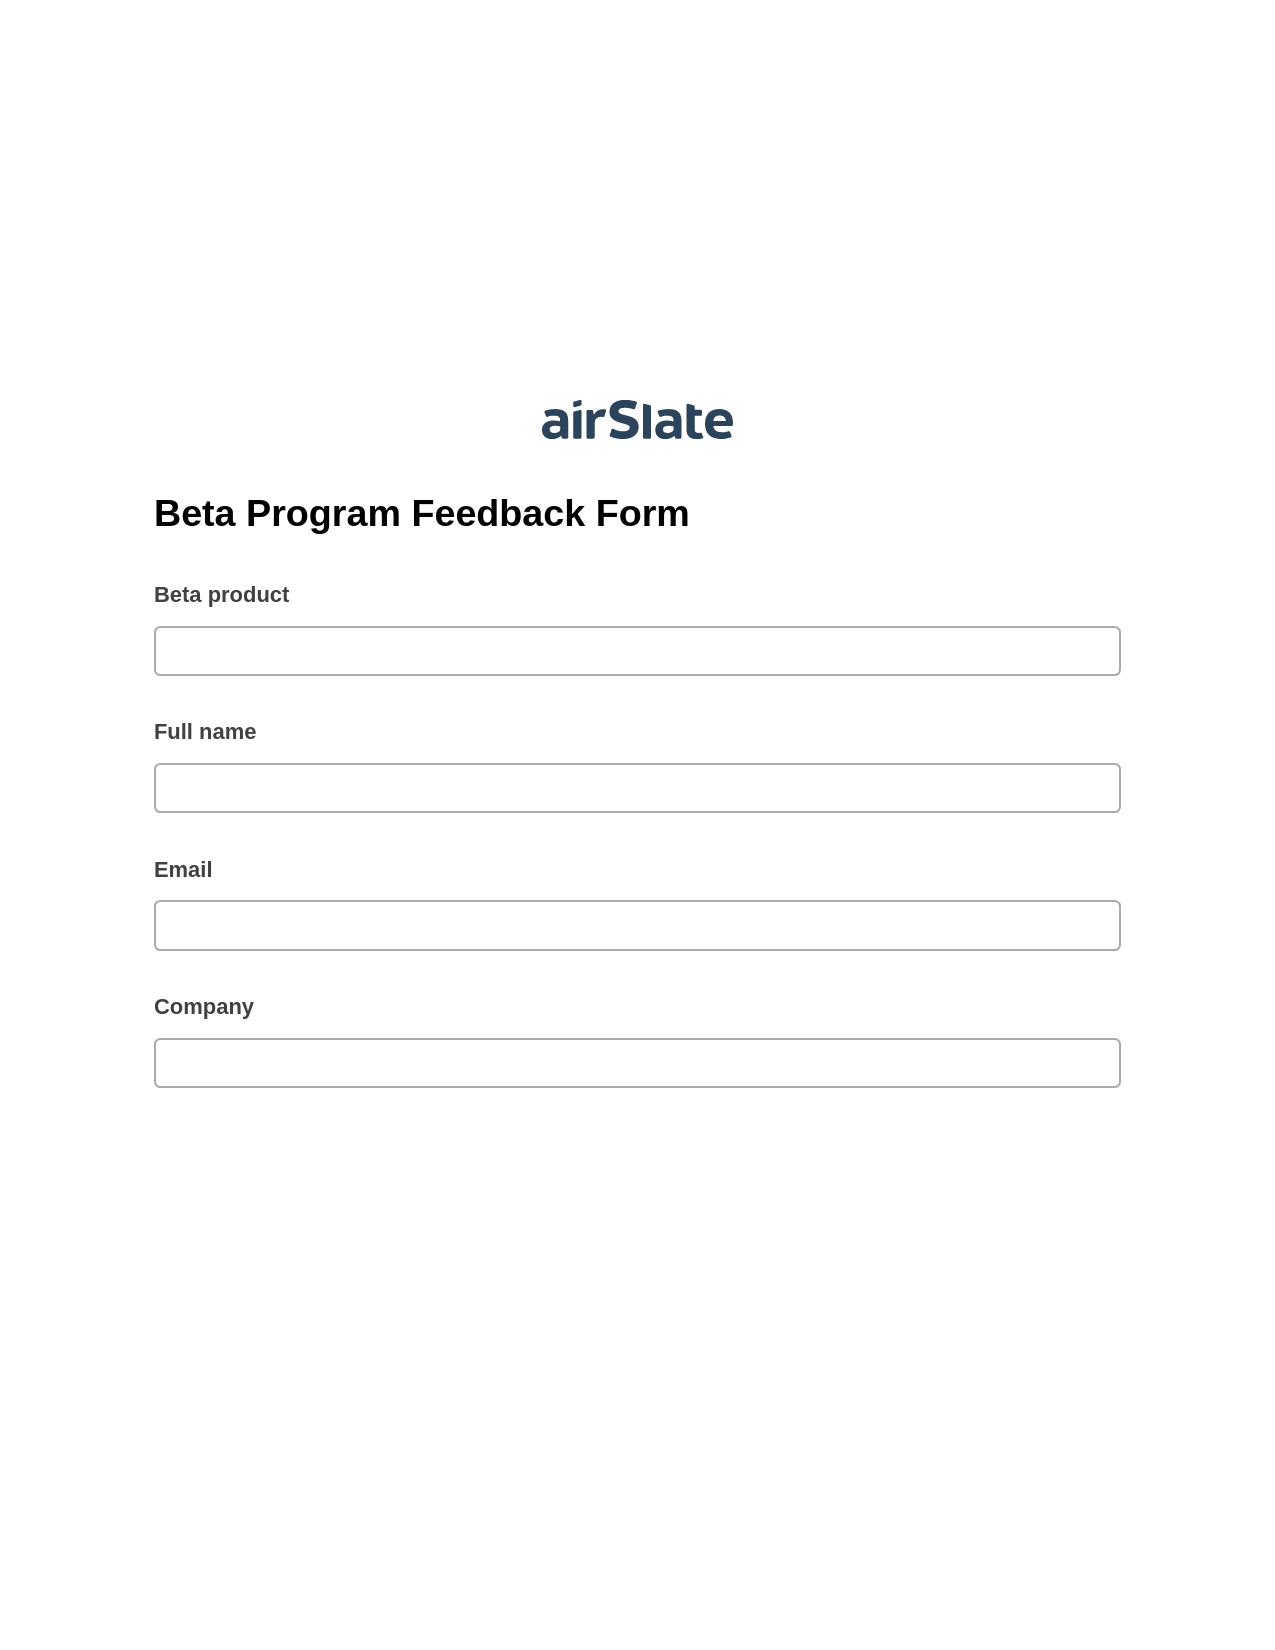 Beta Program Feedback Form Pre-fill Dropdowns from Excel Bot, Export to MS Dynamics 365 Bot, Post-finish Document Bot